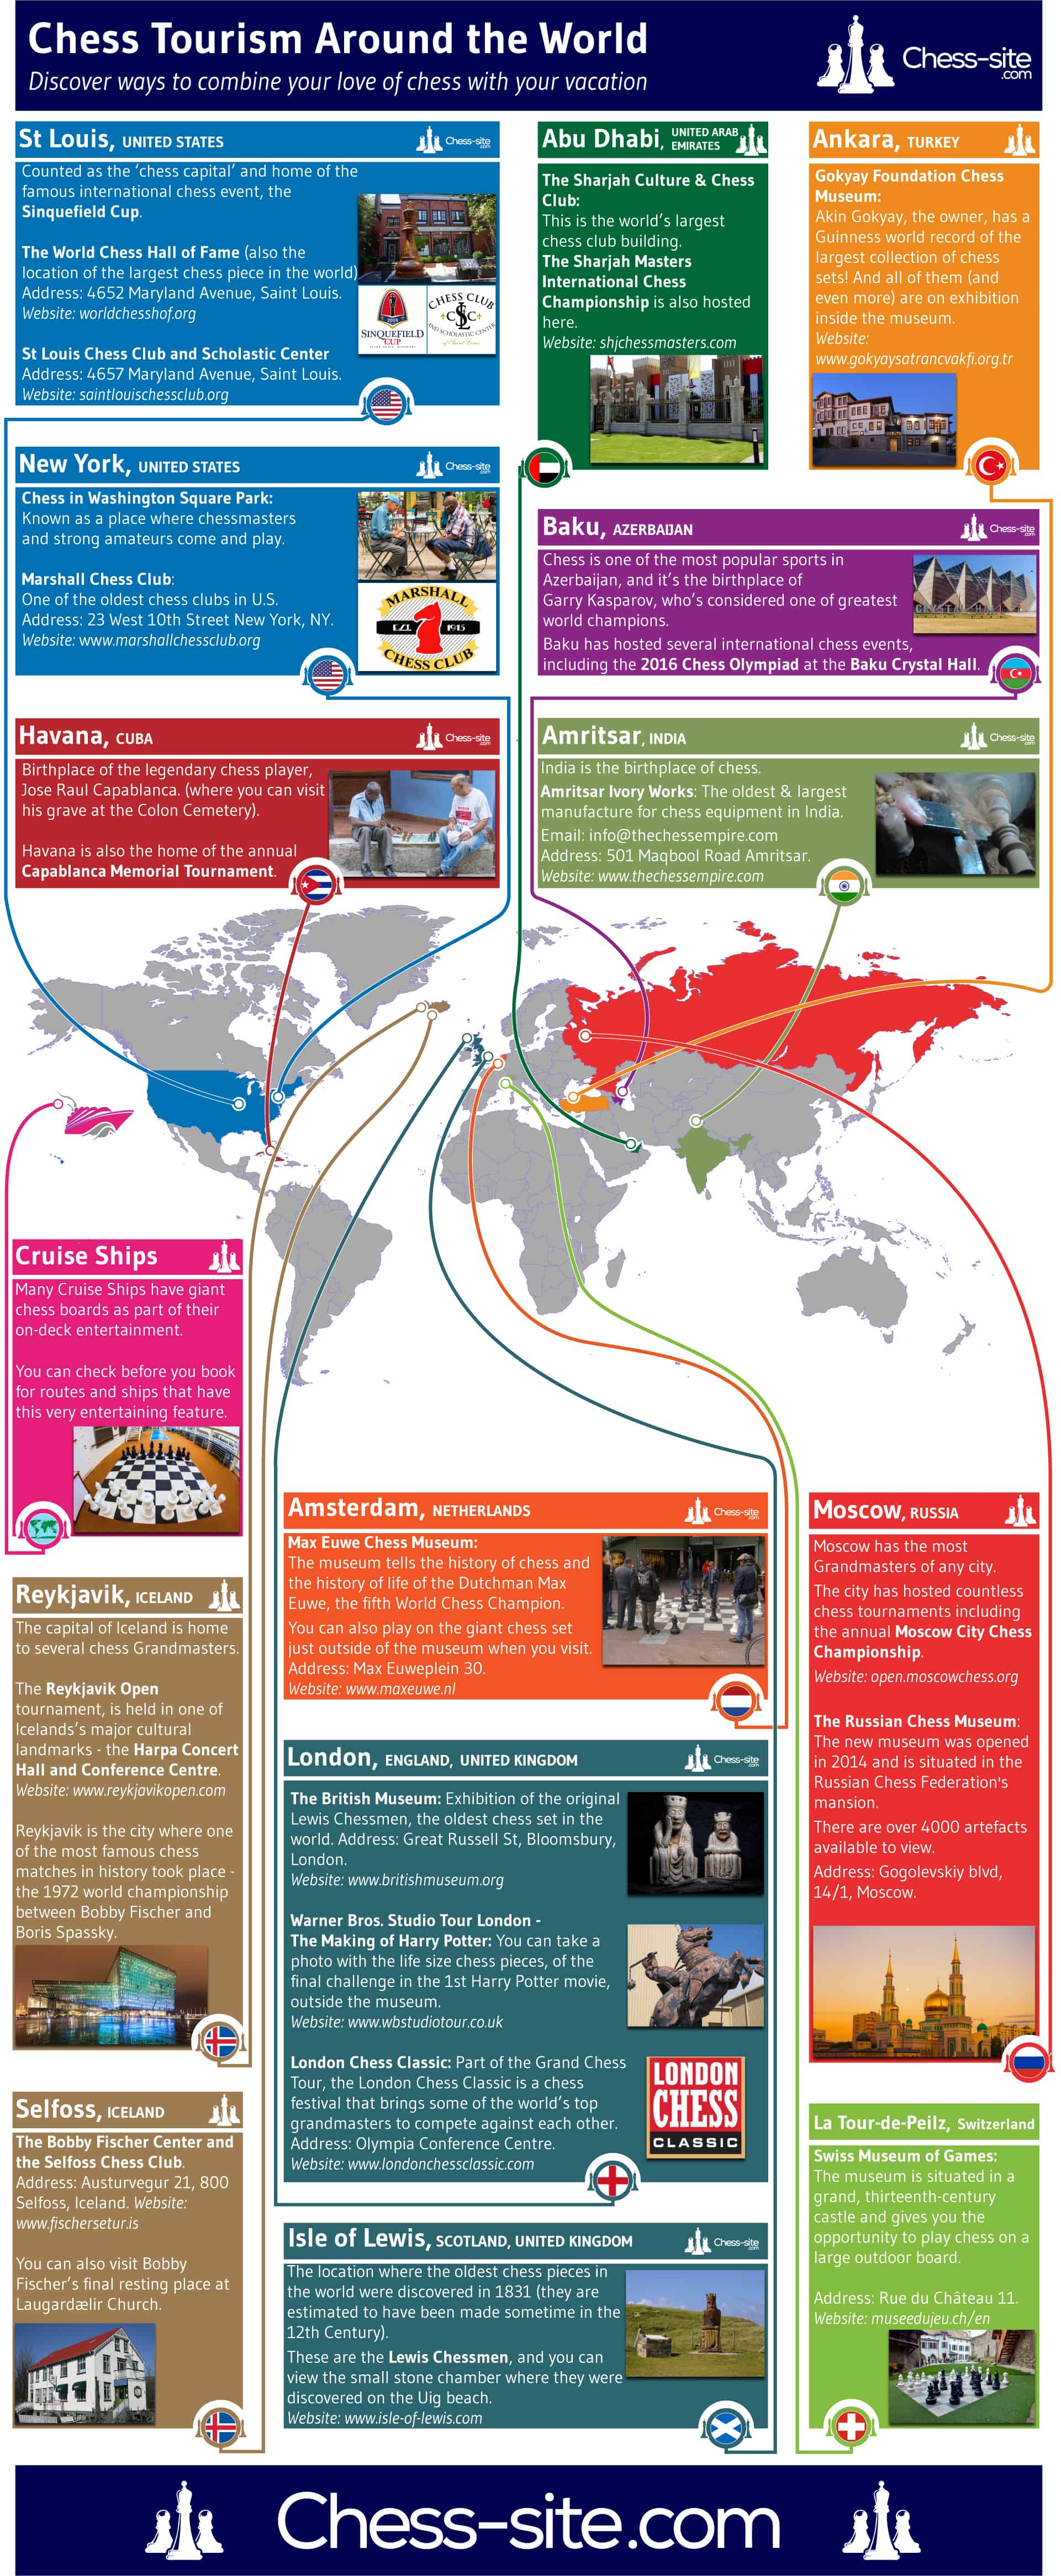 Chess Traveling Tourism Infographic Image